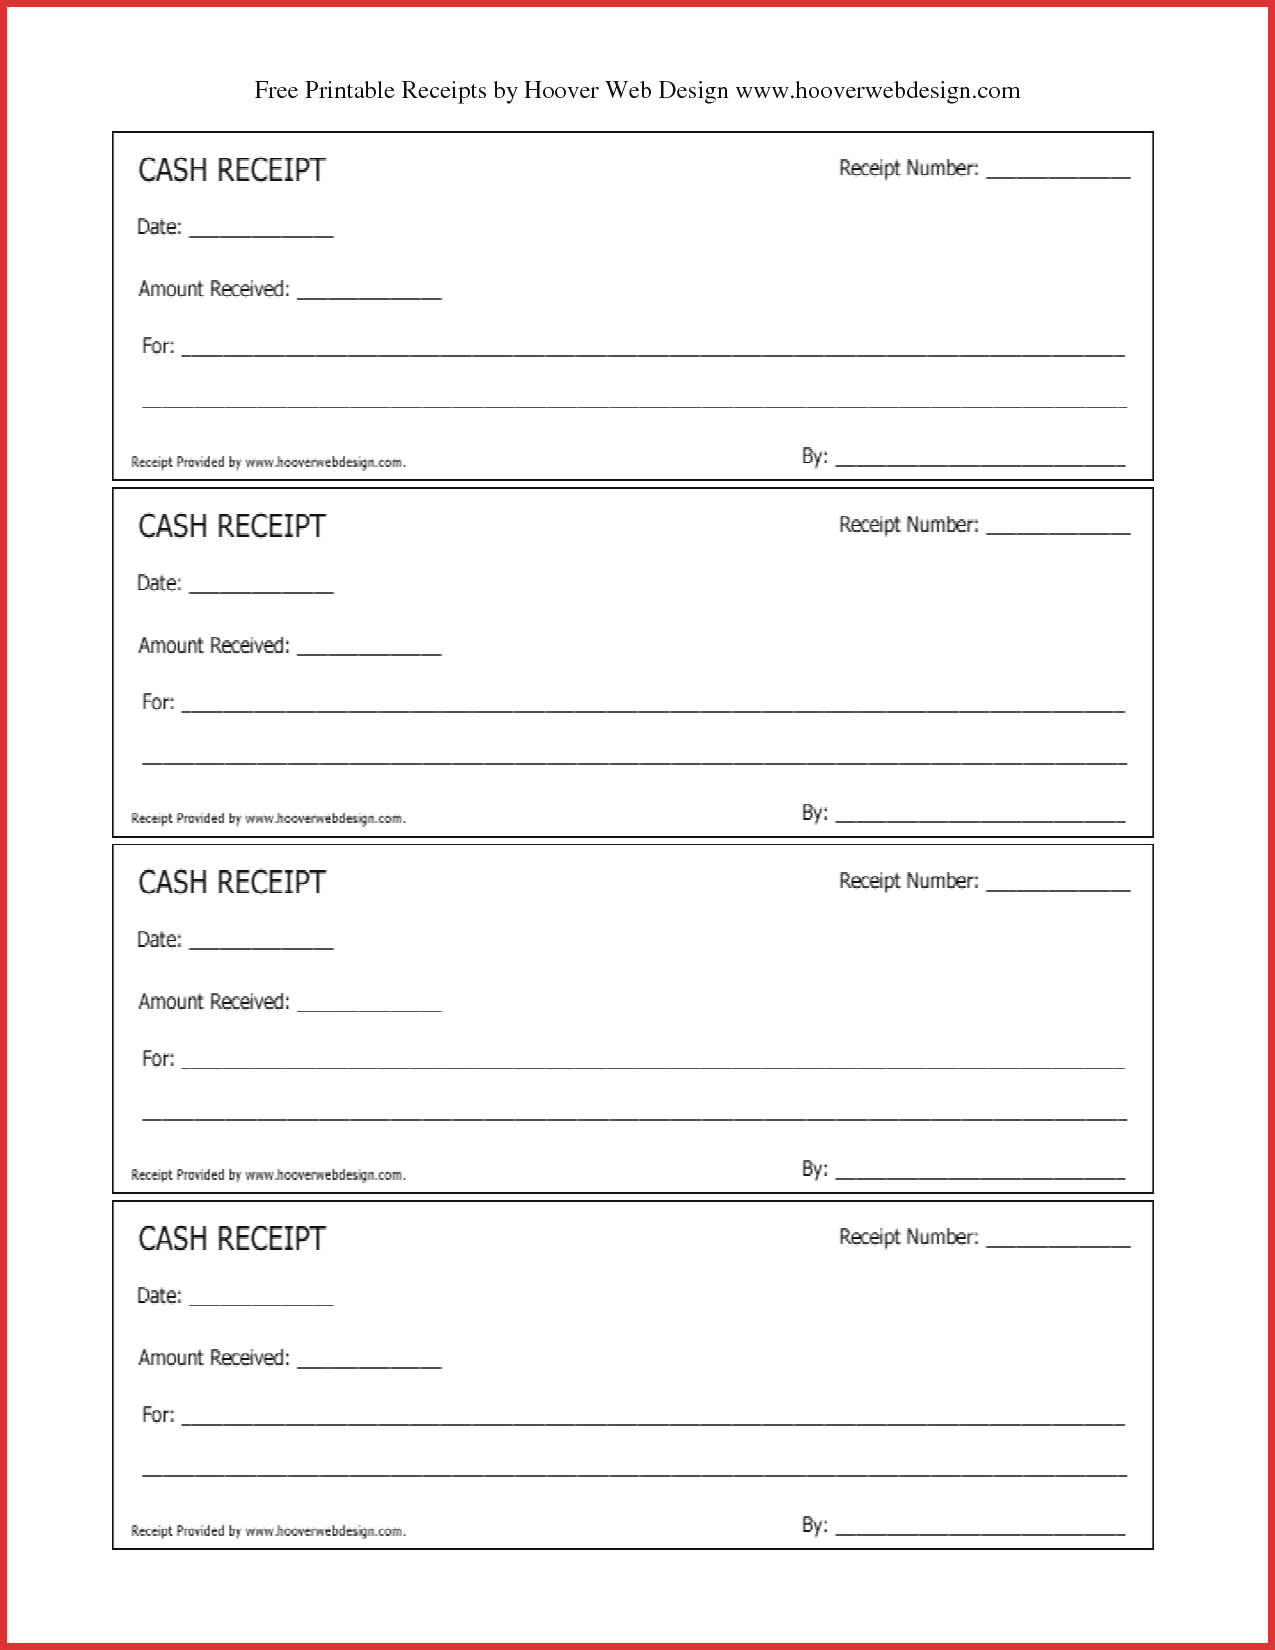 Fresh Printable Receipts | Types Of Letter - Www Hooverwebdesign Com Free Printables Printable Receipts